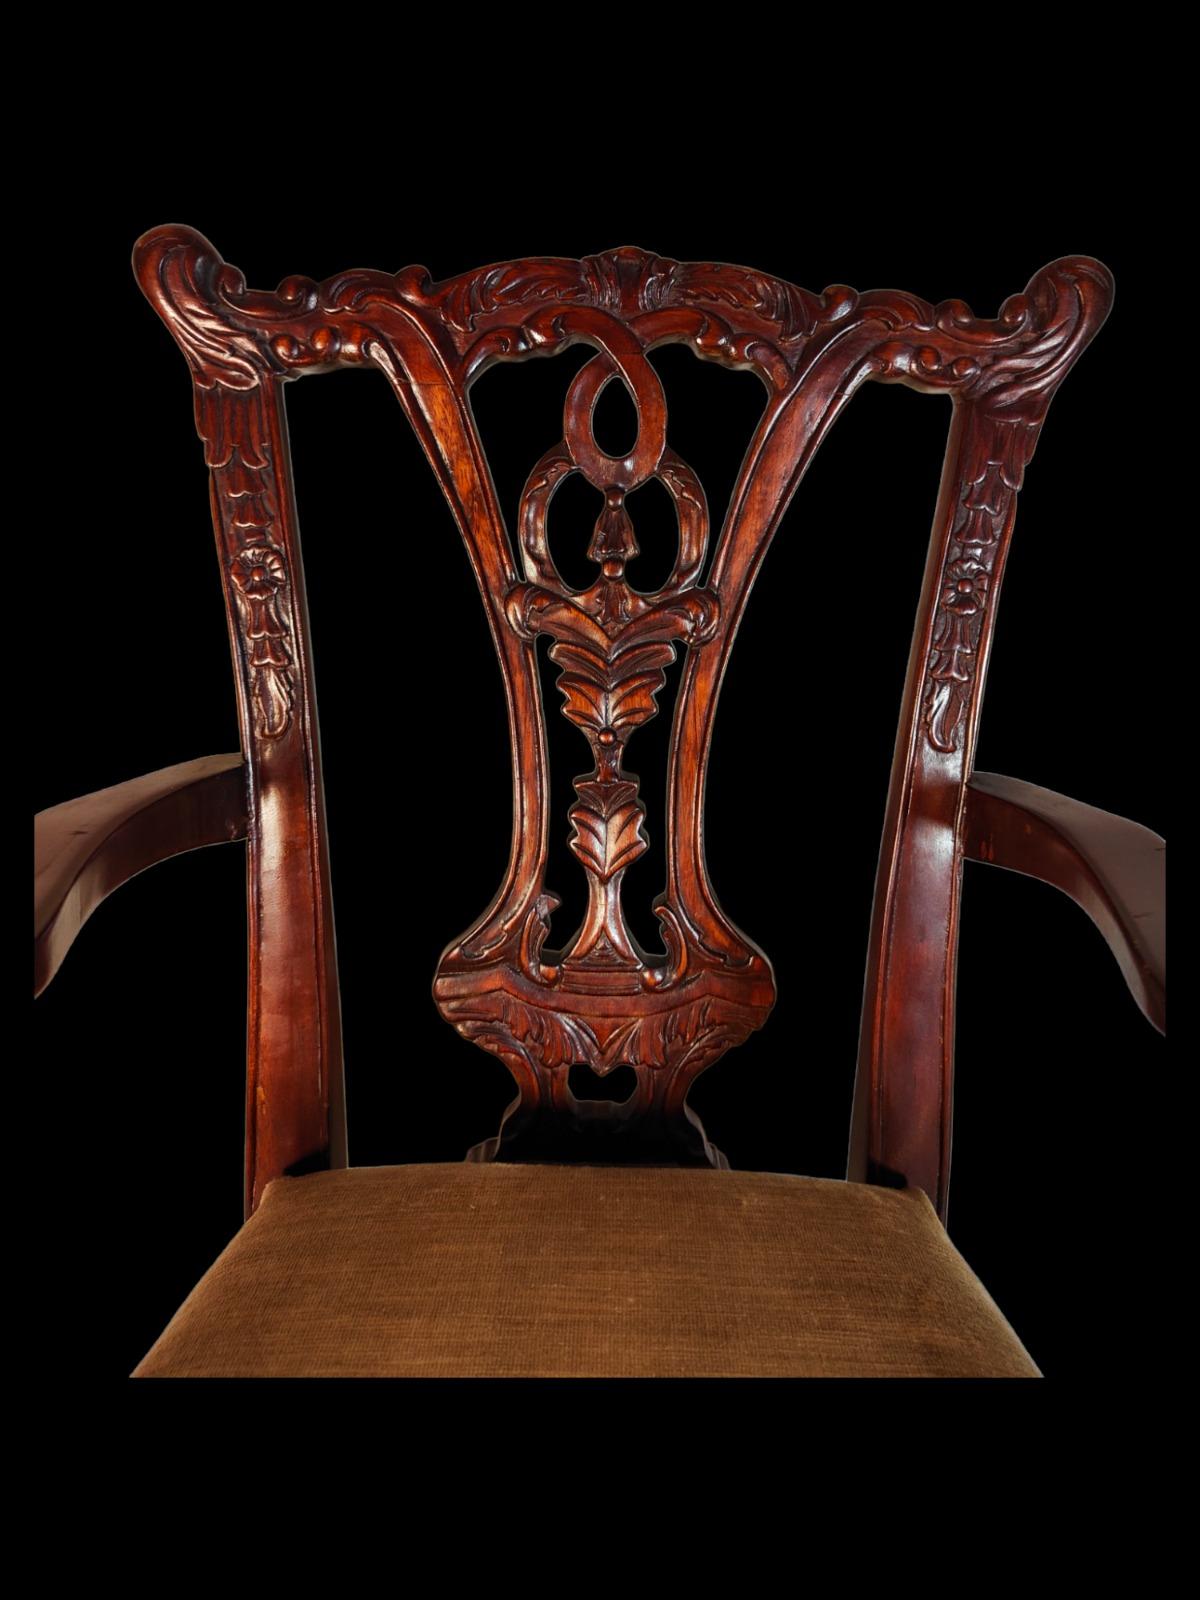 Hand-Crafted 19th Century Miniature Chairs For Sale